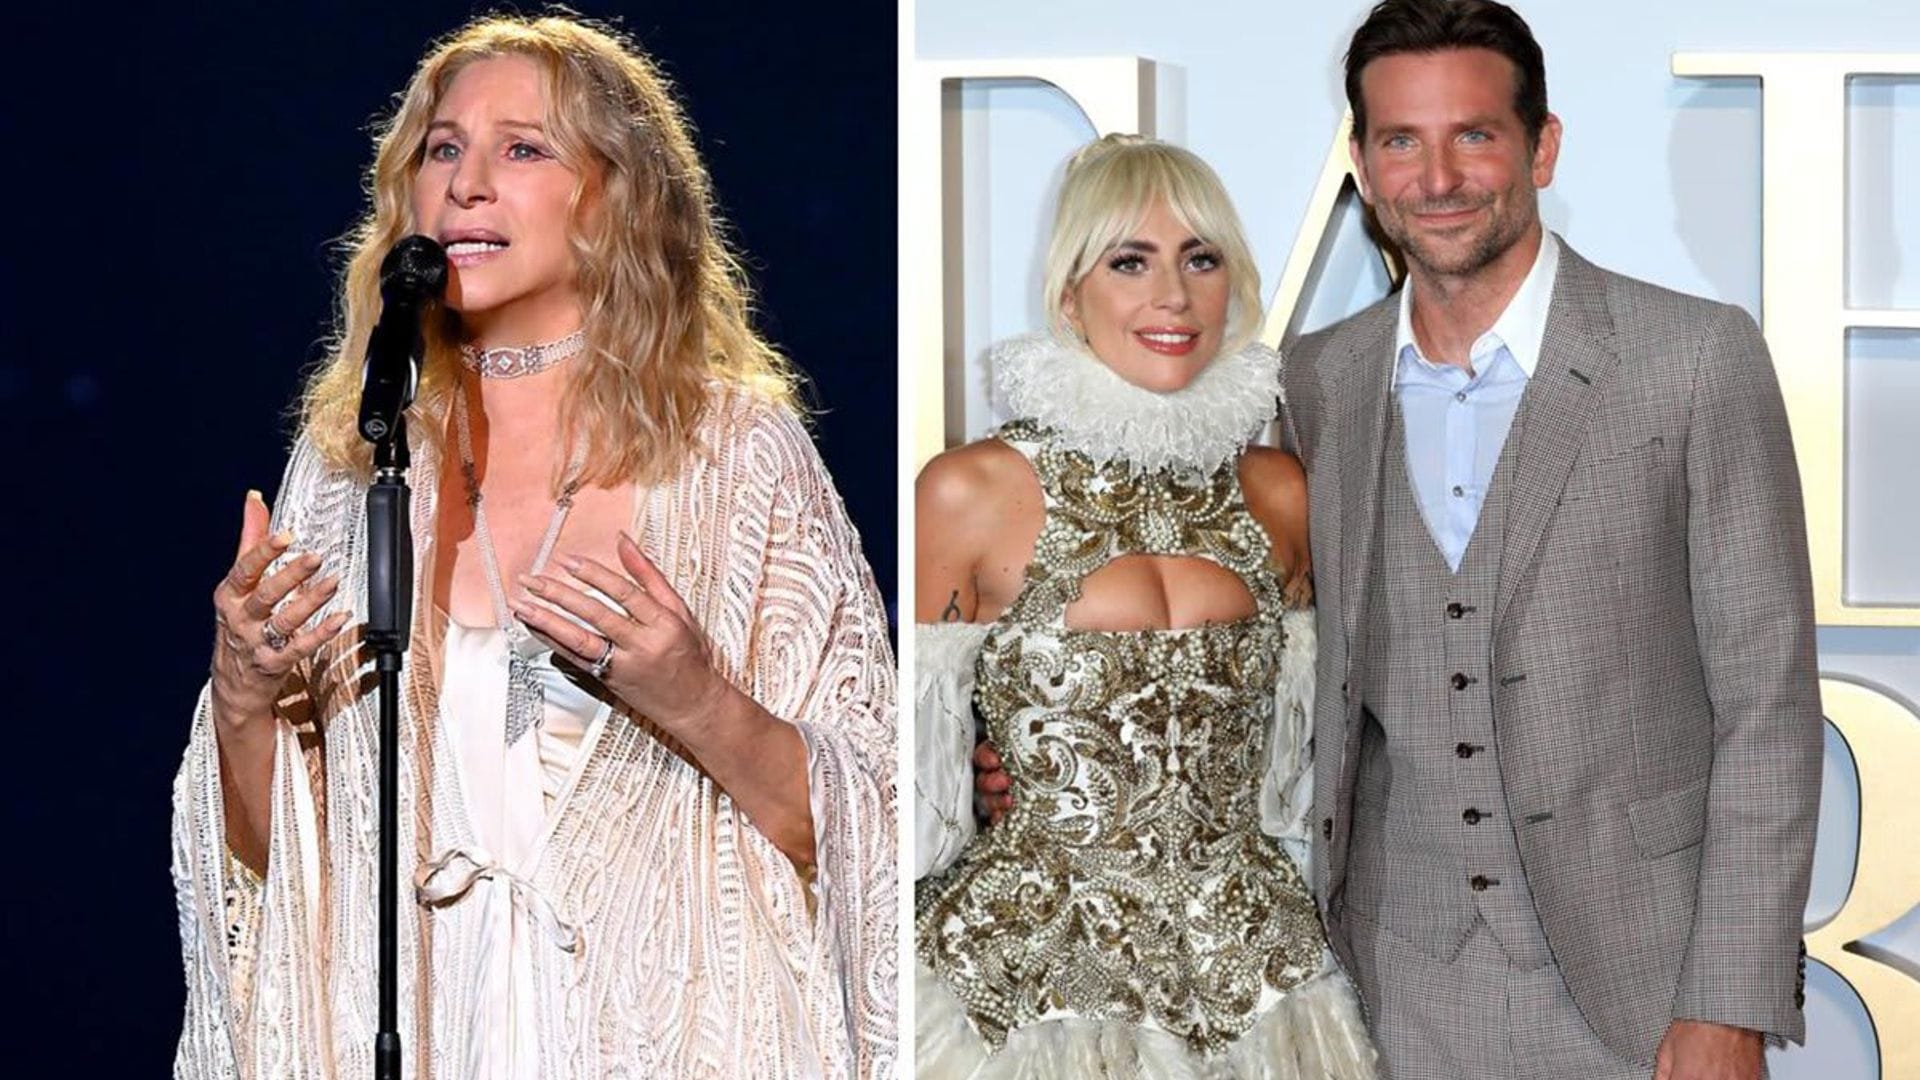 A Star Is Born: Why Barbra Streisand disliked Lady Gaga and Bradley Cooper’s version